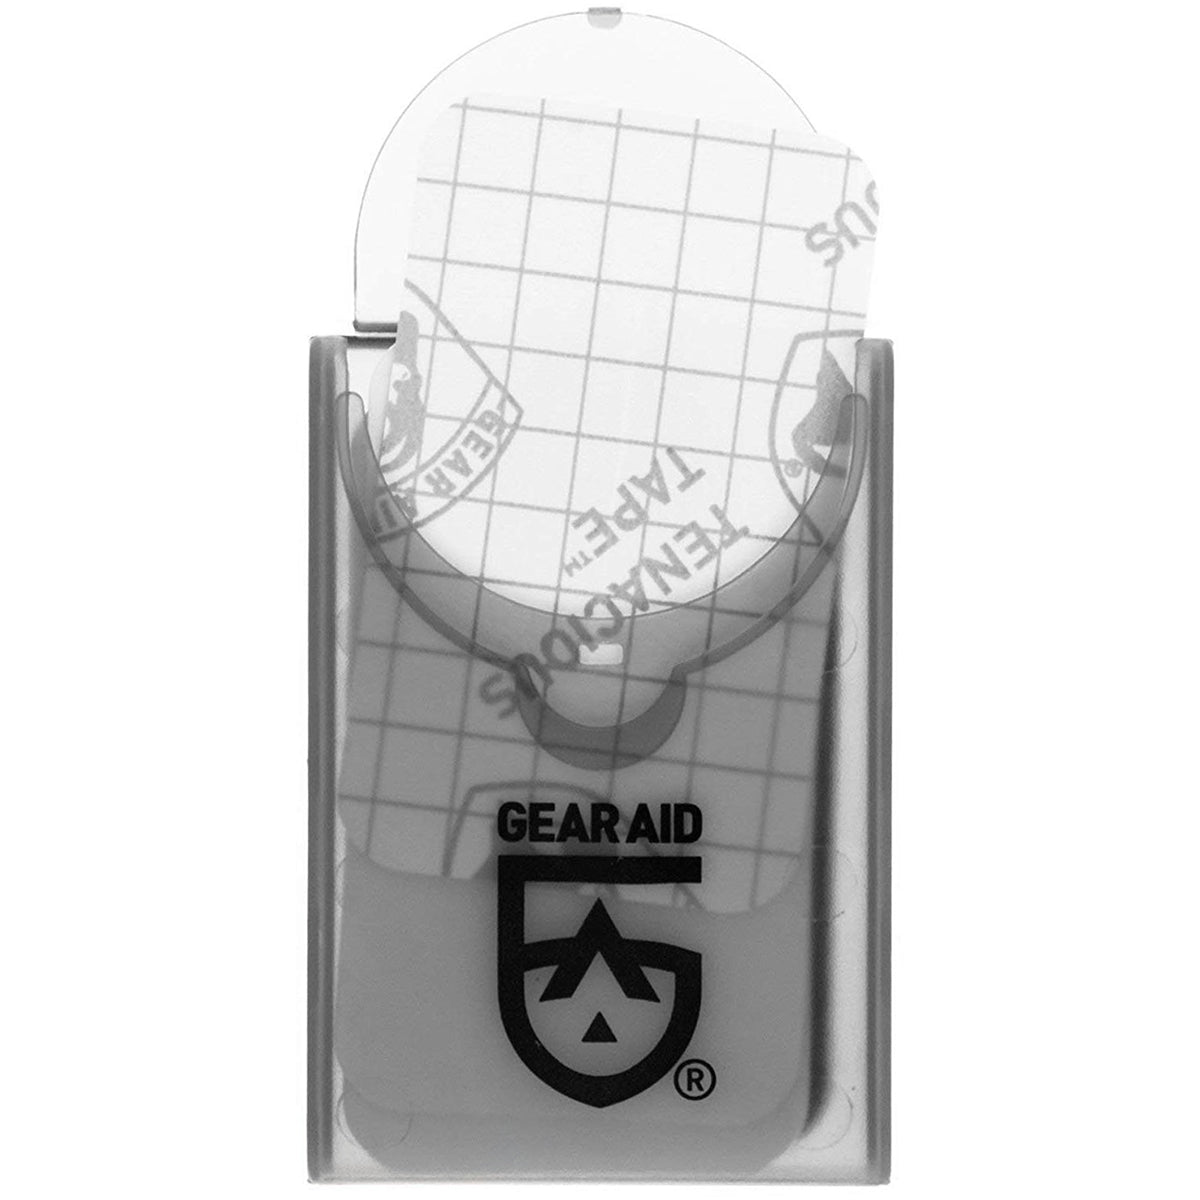 Gear Aid Tenacious Tape 1.5" x 2.5" No-Sew Peel and Stick Mini Patches Gear Aid